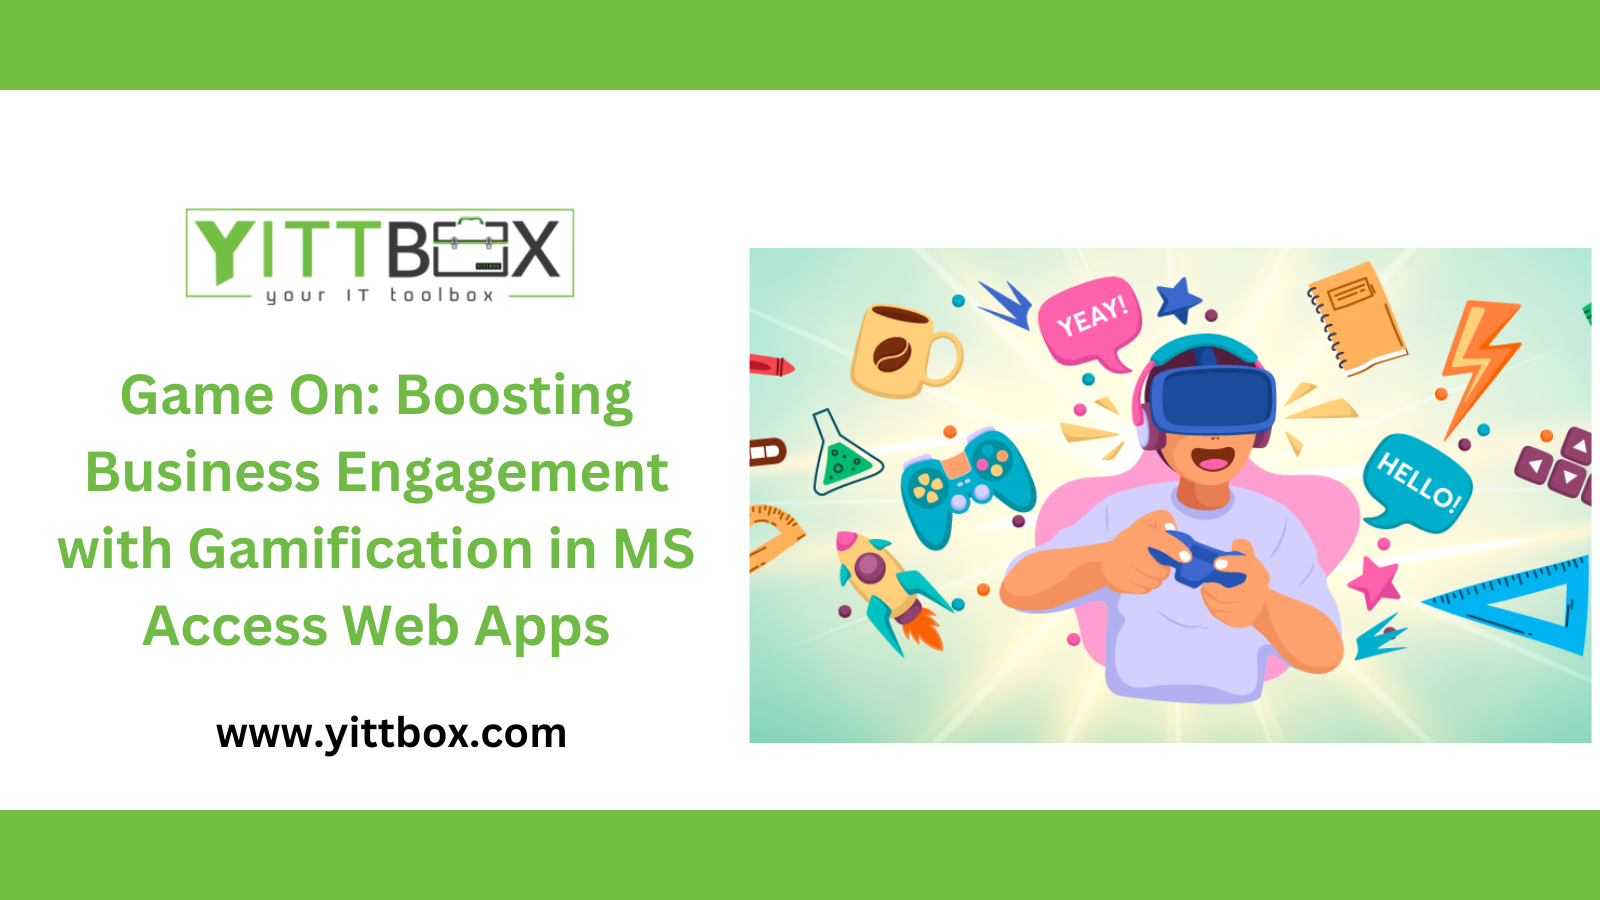 Game On: Boosting Business Engagement with Gamification in MS Access Web Apps